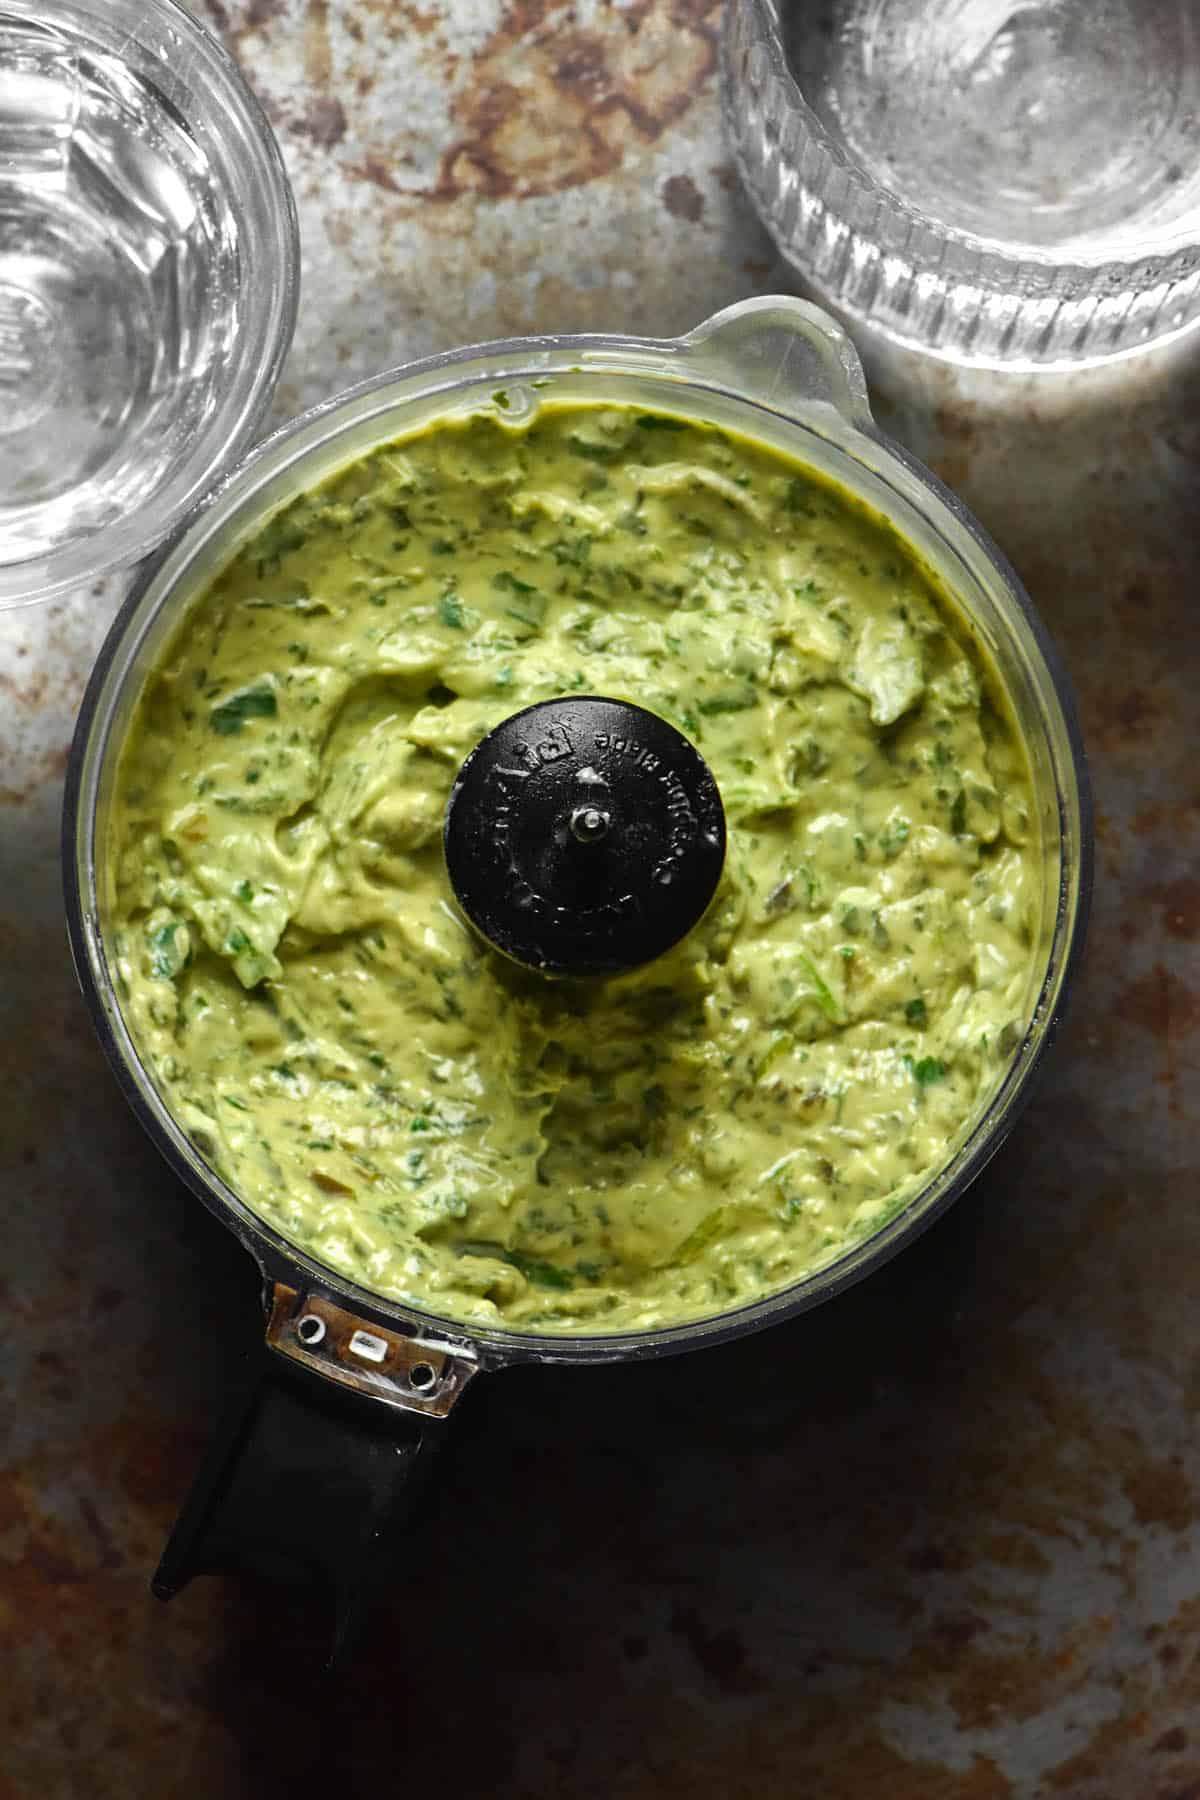 An aerial image of avocado cilantro sauce in a food processor on a dark steel backdrop surrounded by two glasses of water.